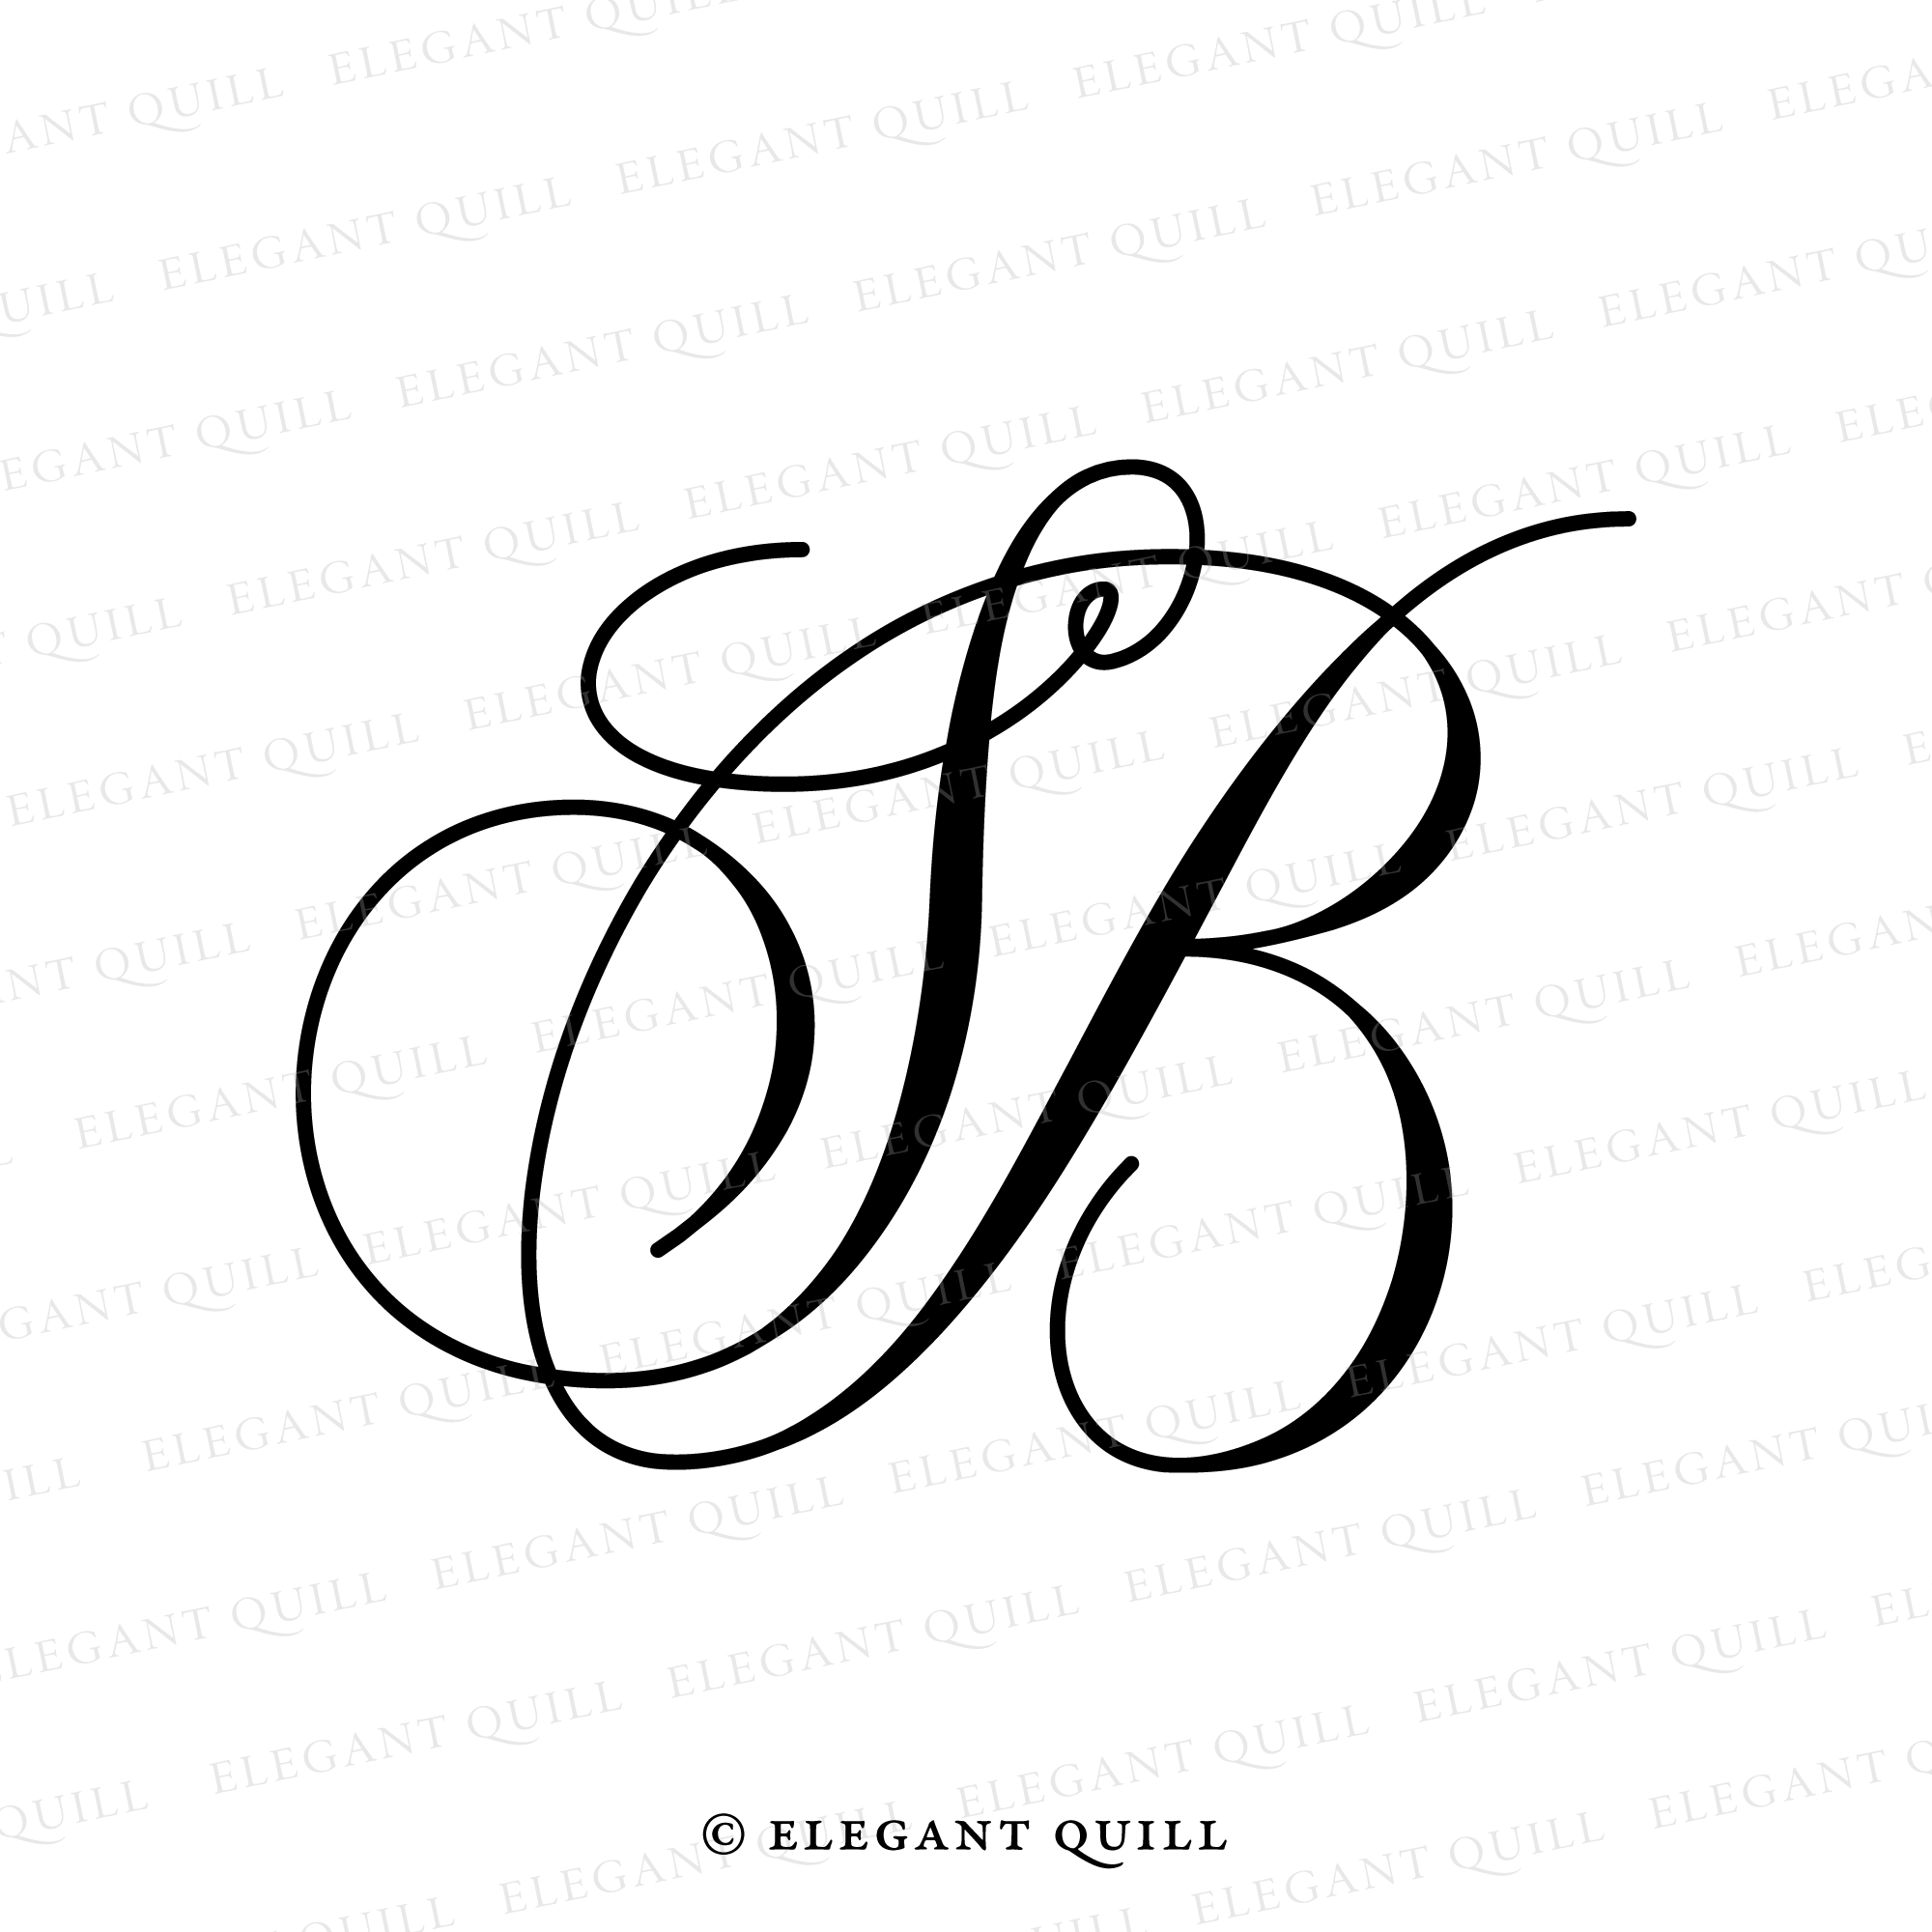 Bs b s brushed letter logo design with creative Vector Image